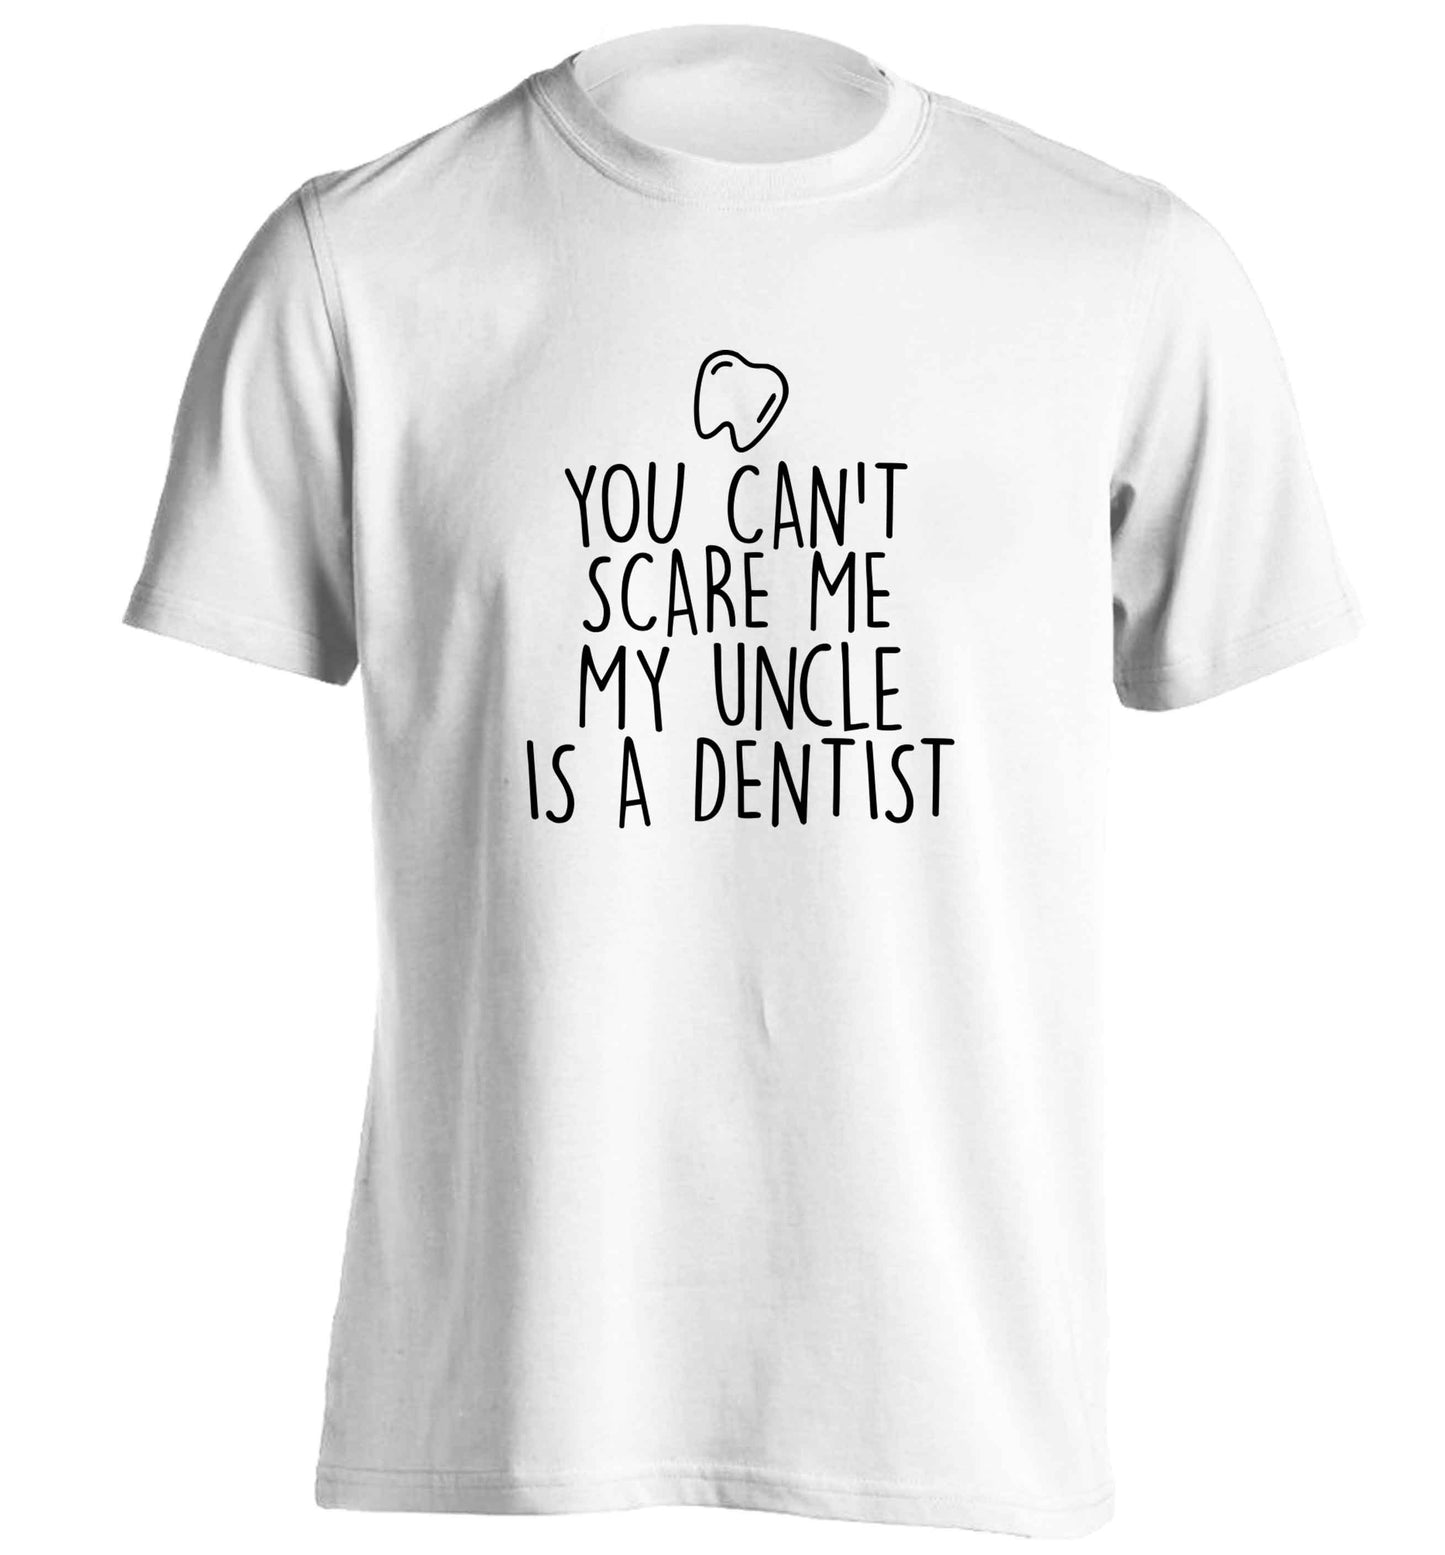 You can't scare me my uncle is a dentist adults unisex white Tshirt 2XL